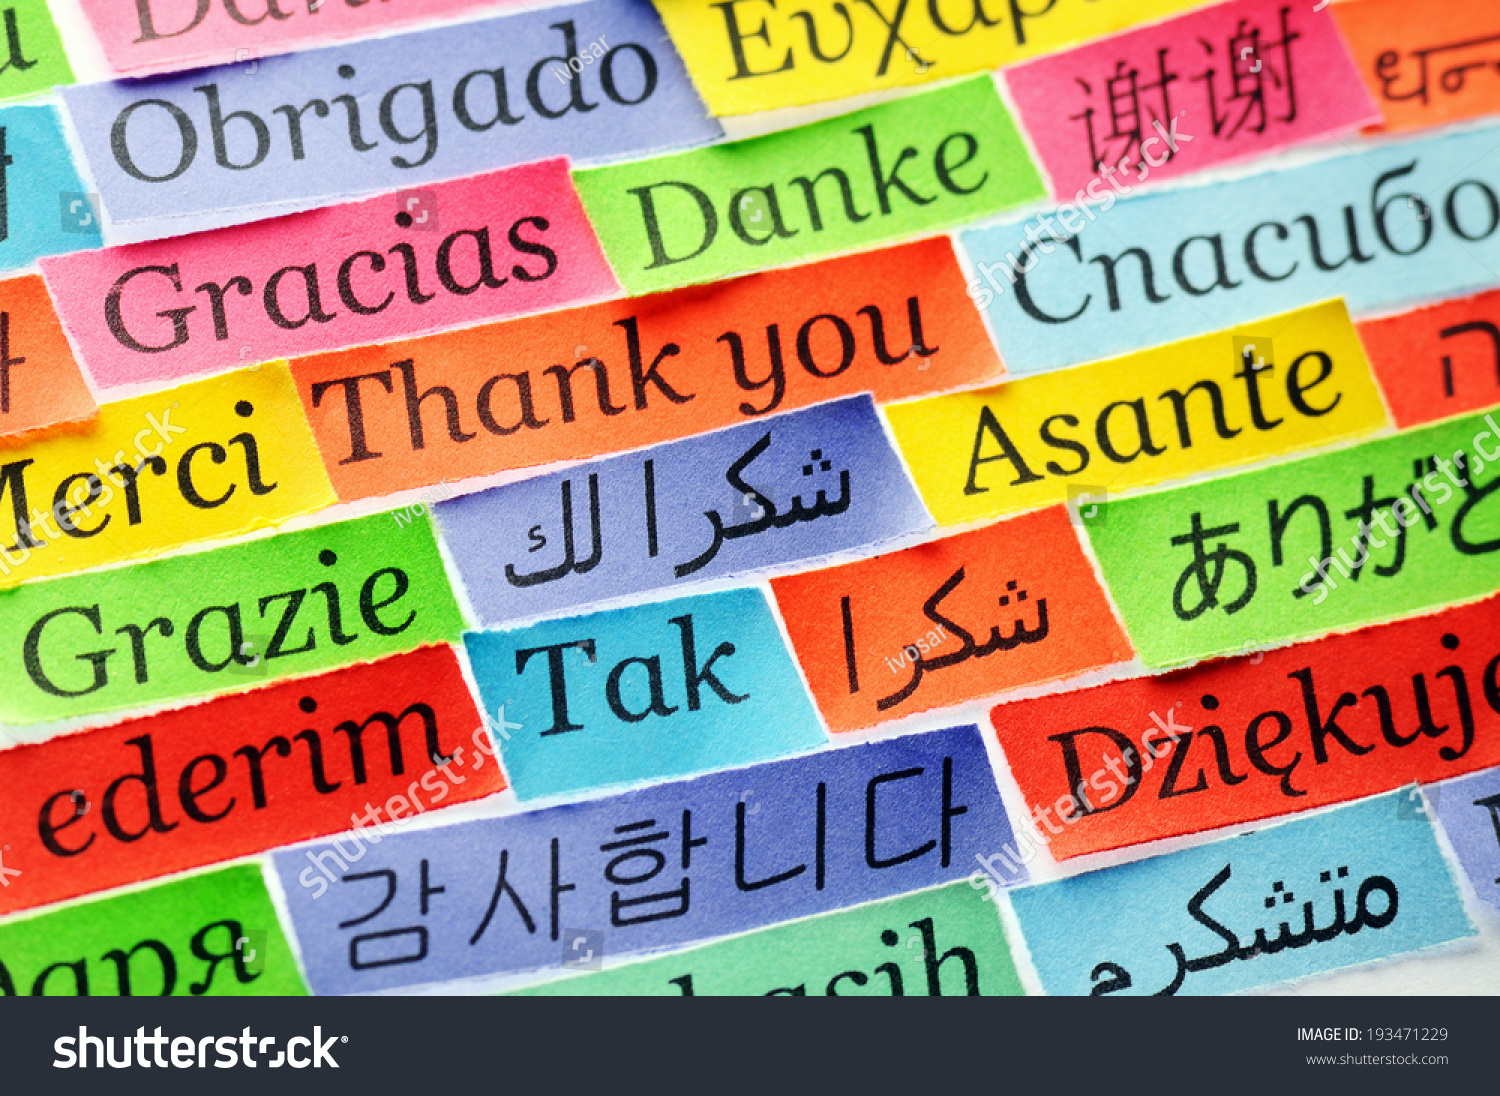 thank you clipart in different languages - photo #37